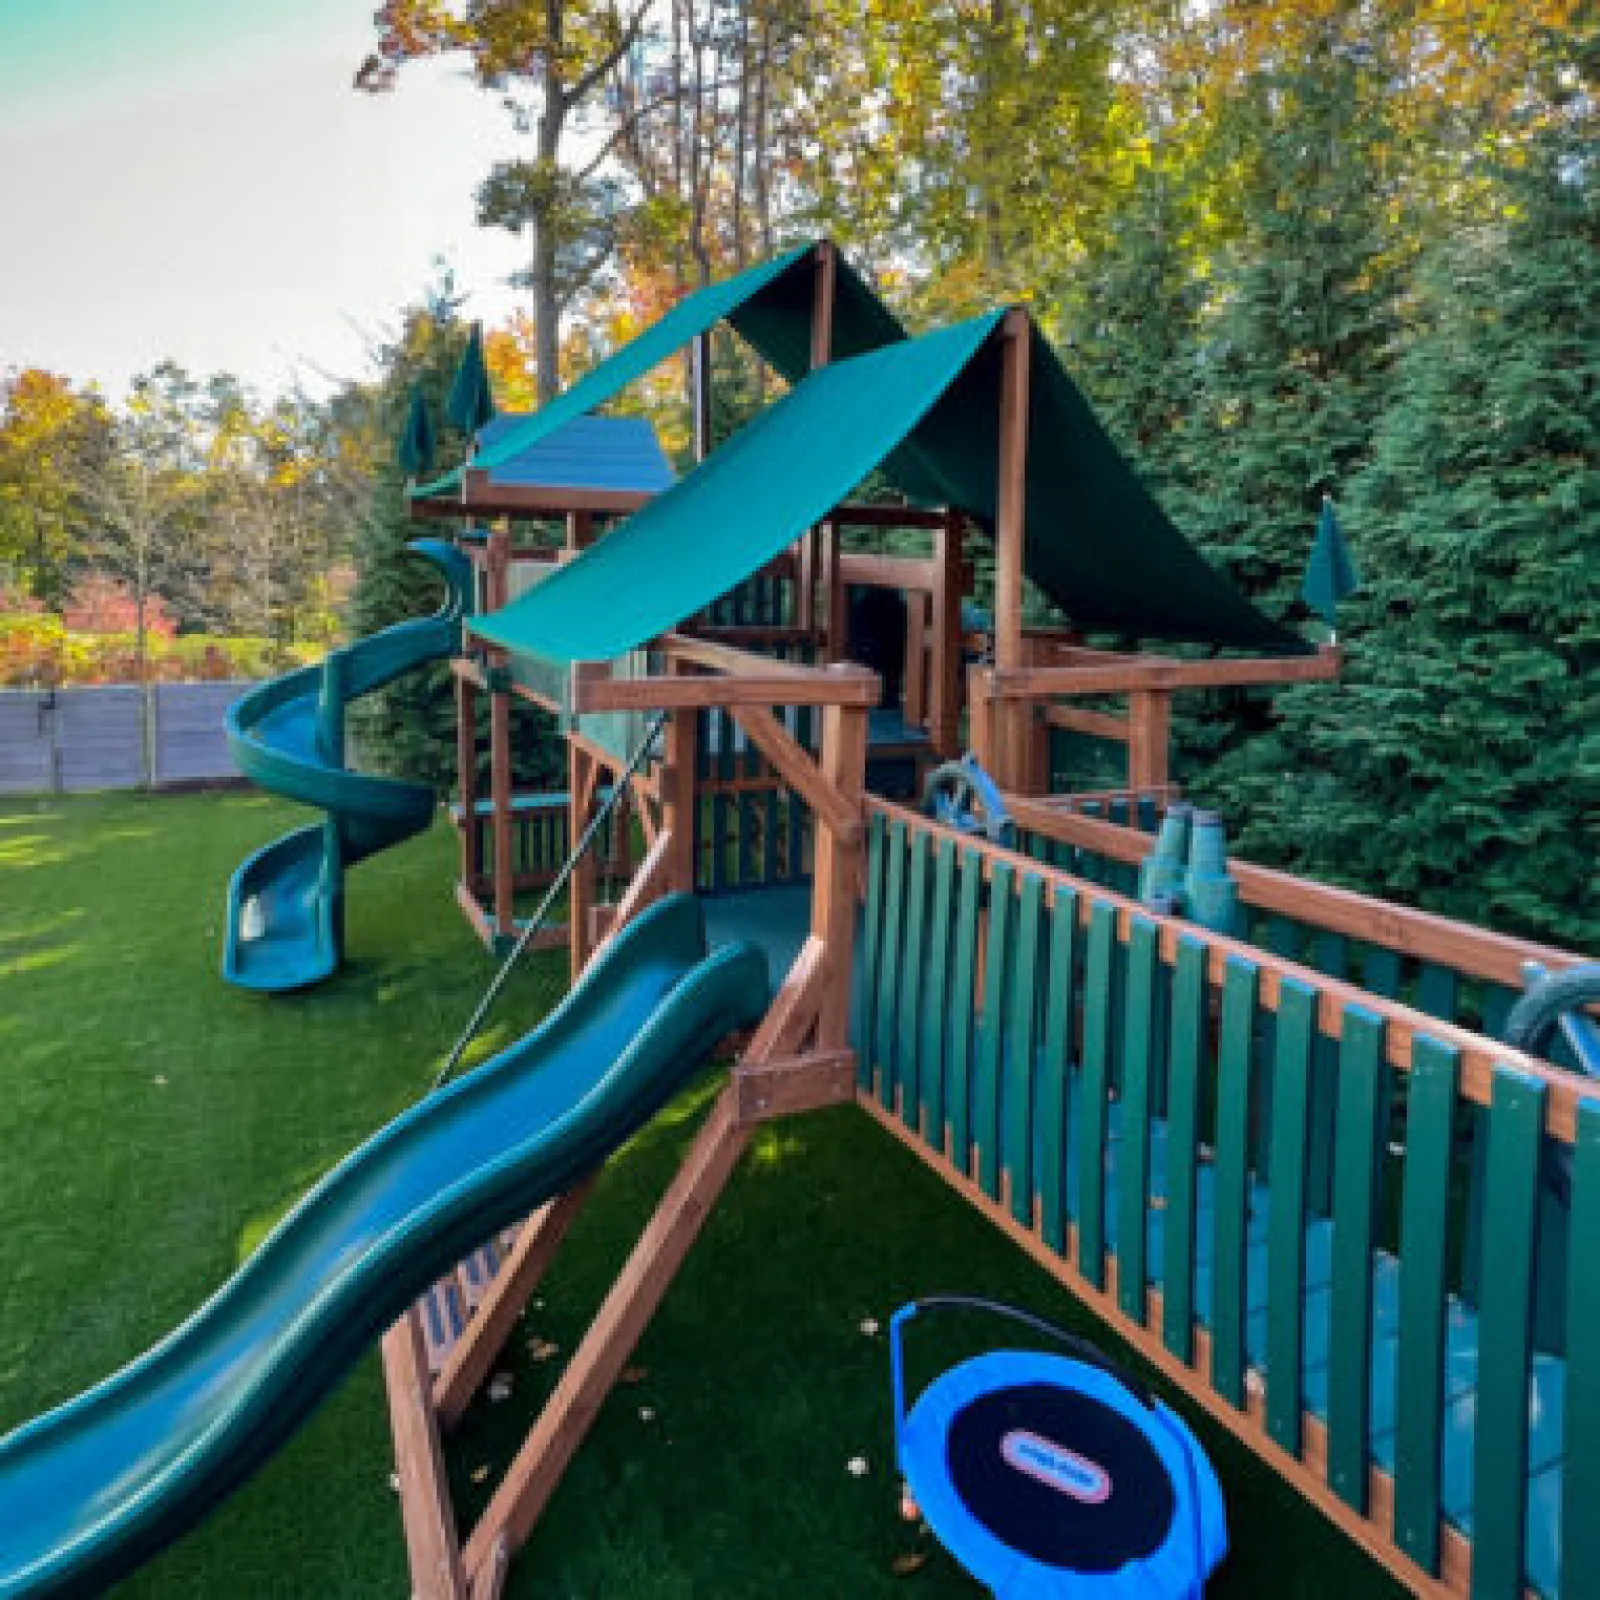 a small play structure